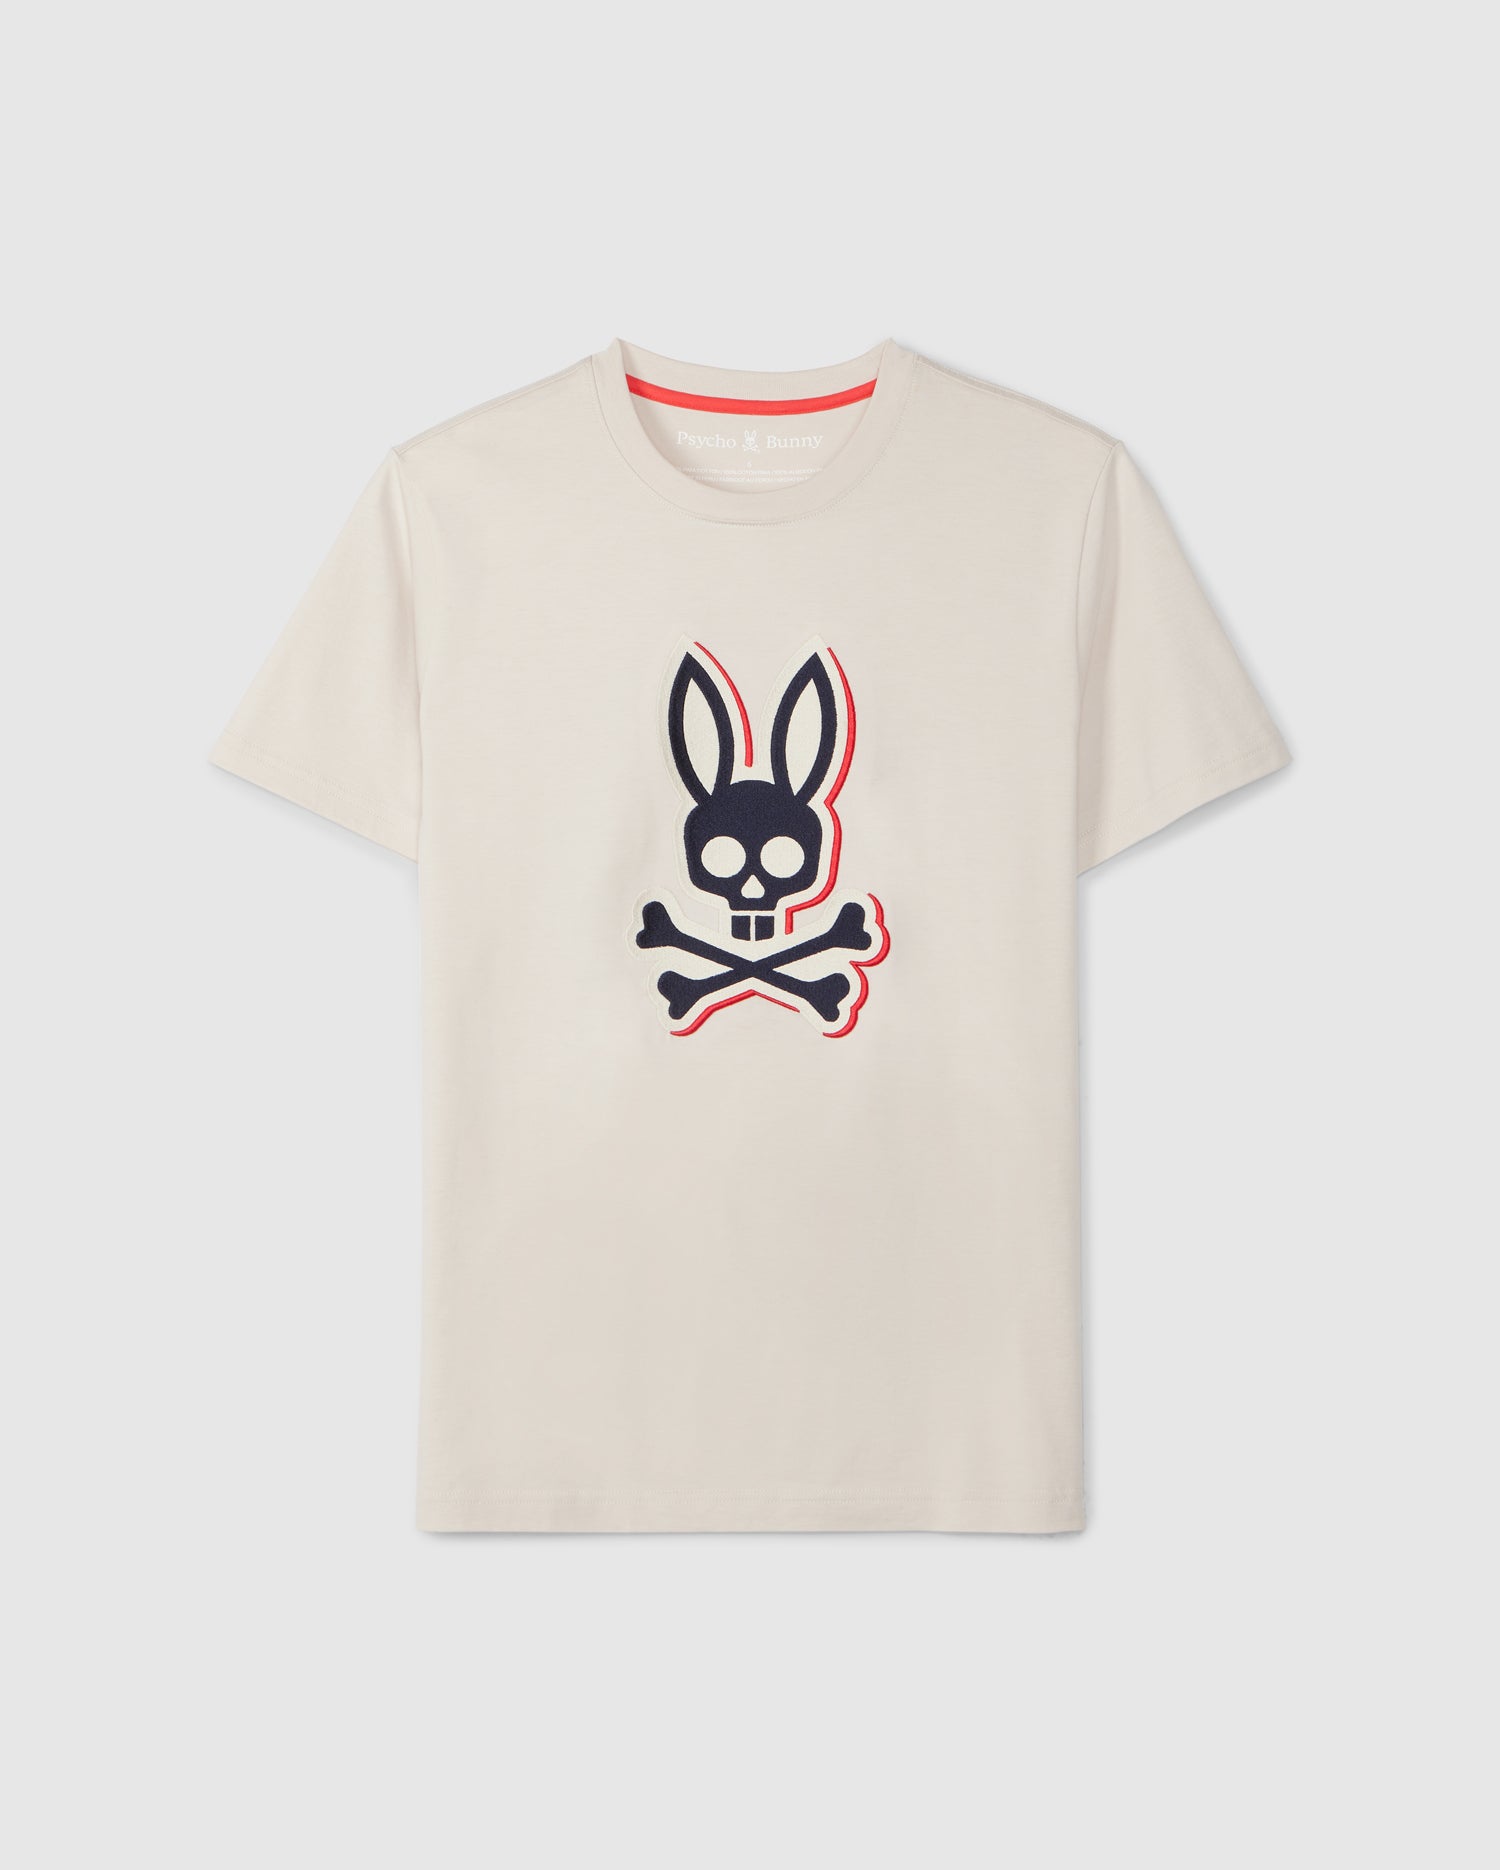 A **Psycho Bunny MENS KAYDEN GRAPHIC TEE - B6U676C200**, made from soft Pima cotton, featuring a black and red cartoonish bunny head with crossbones beneath it on the front. The shirt has a round neckline and short sleeves, displayed against a plain white background.